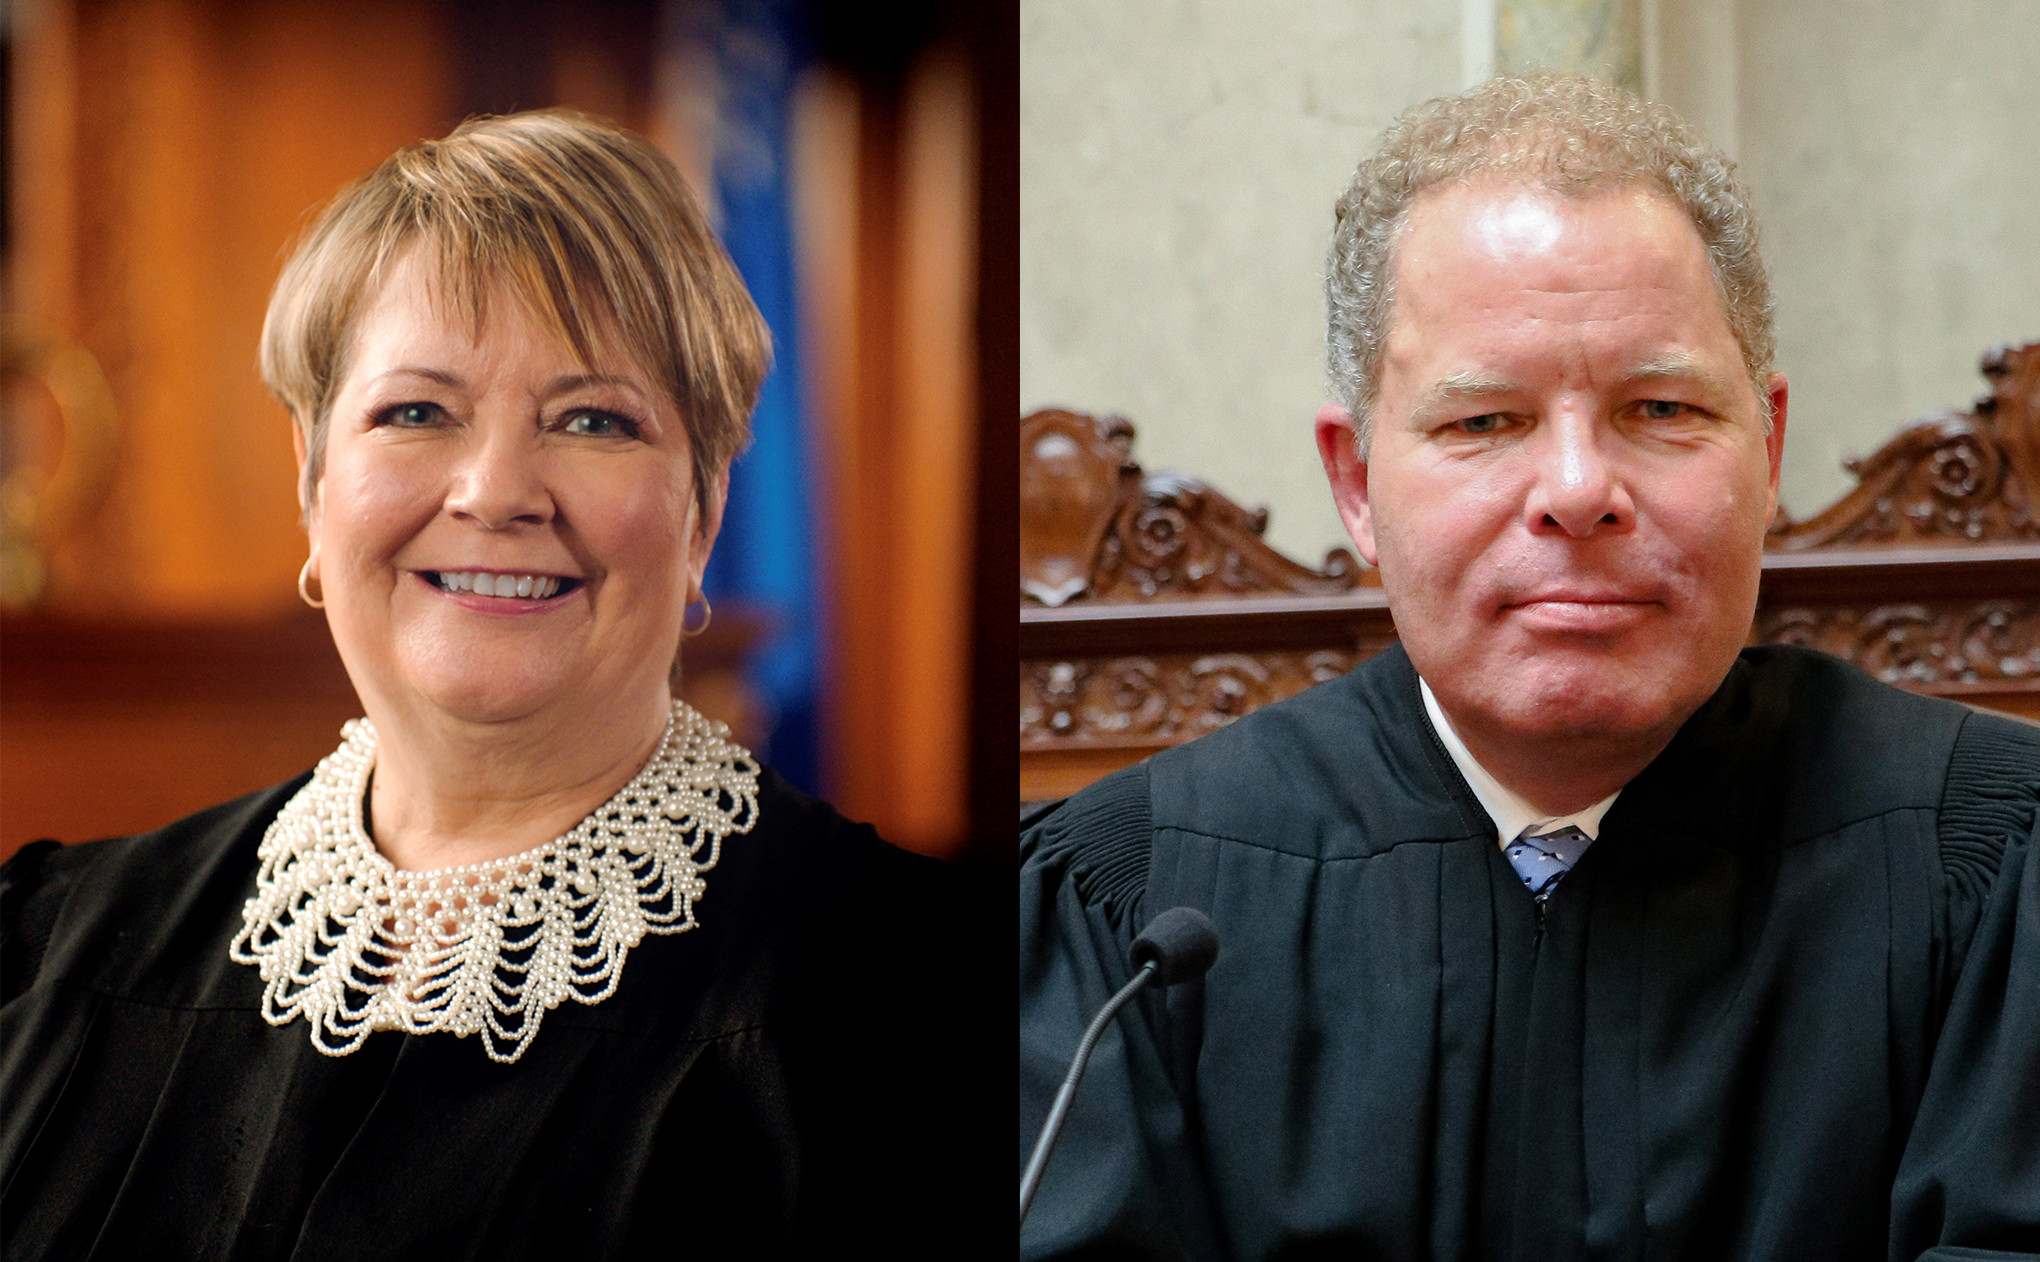 Janet Protasiewicz, Dan Kelly to face off in high-stakes Wisconsin Supreme Court election